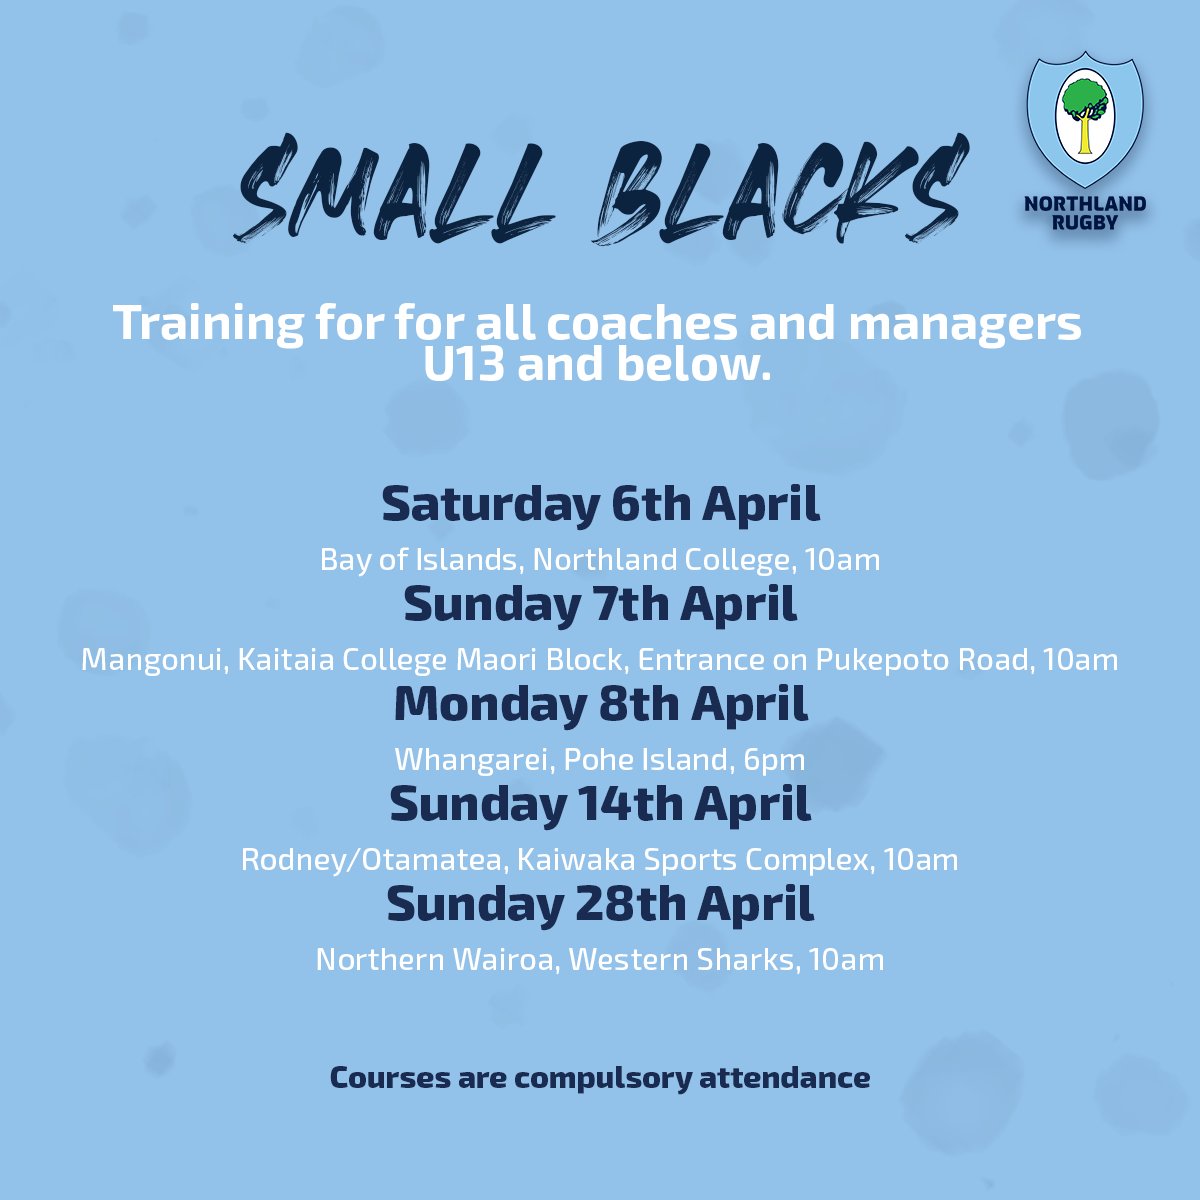 A reminder that Small Blacks courses will be starting this Saturday 6th April. This is a compulsory course for all coaches and managers U13 and below. Still need to register as a coach or volunteer? Find your club and register here 👉 bit.ly/3PLnB7g